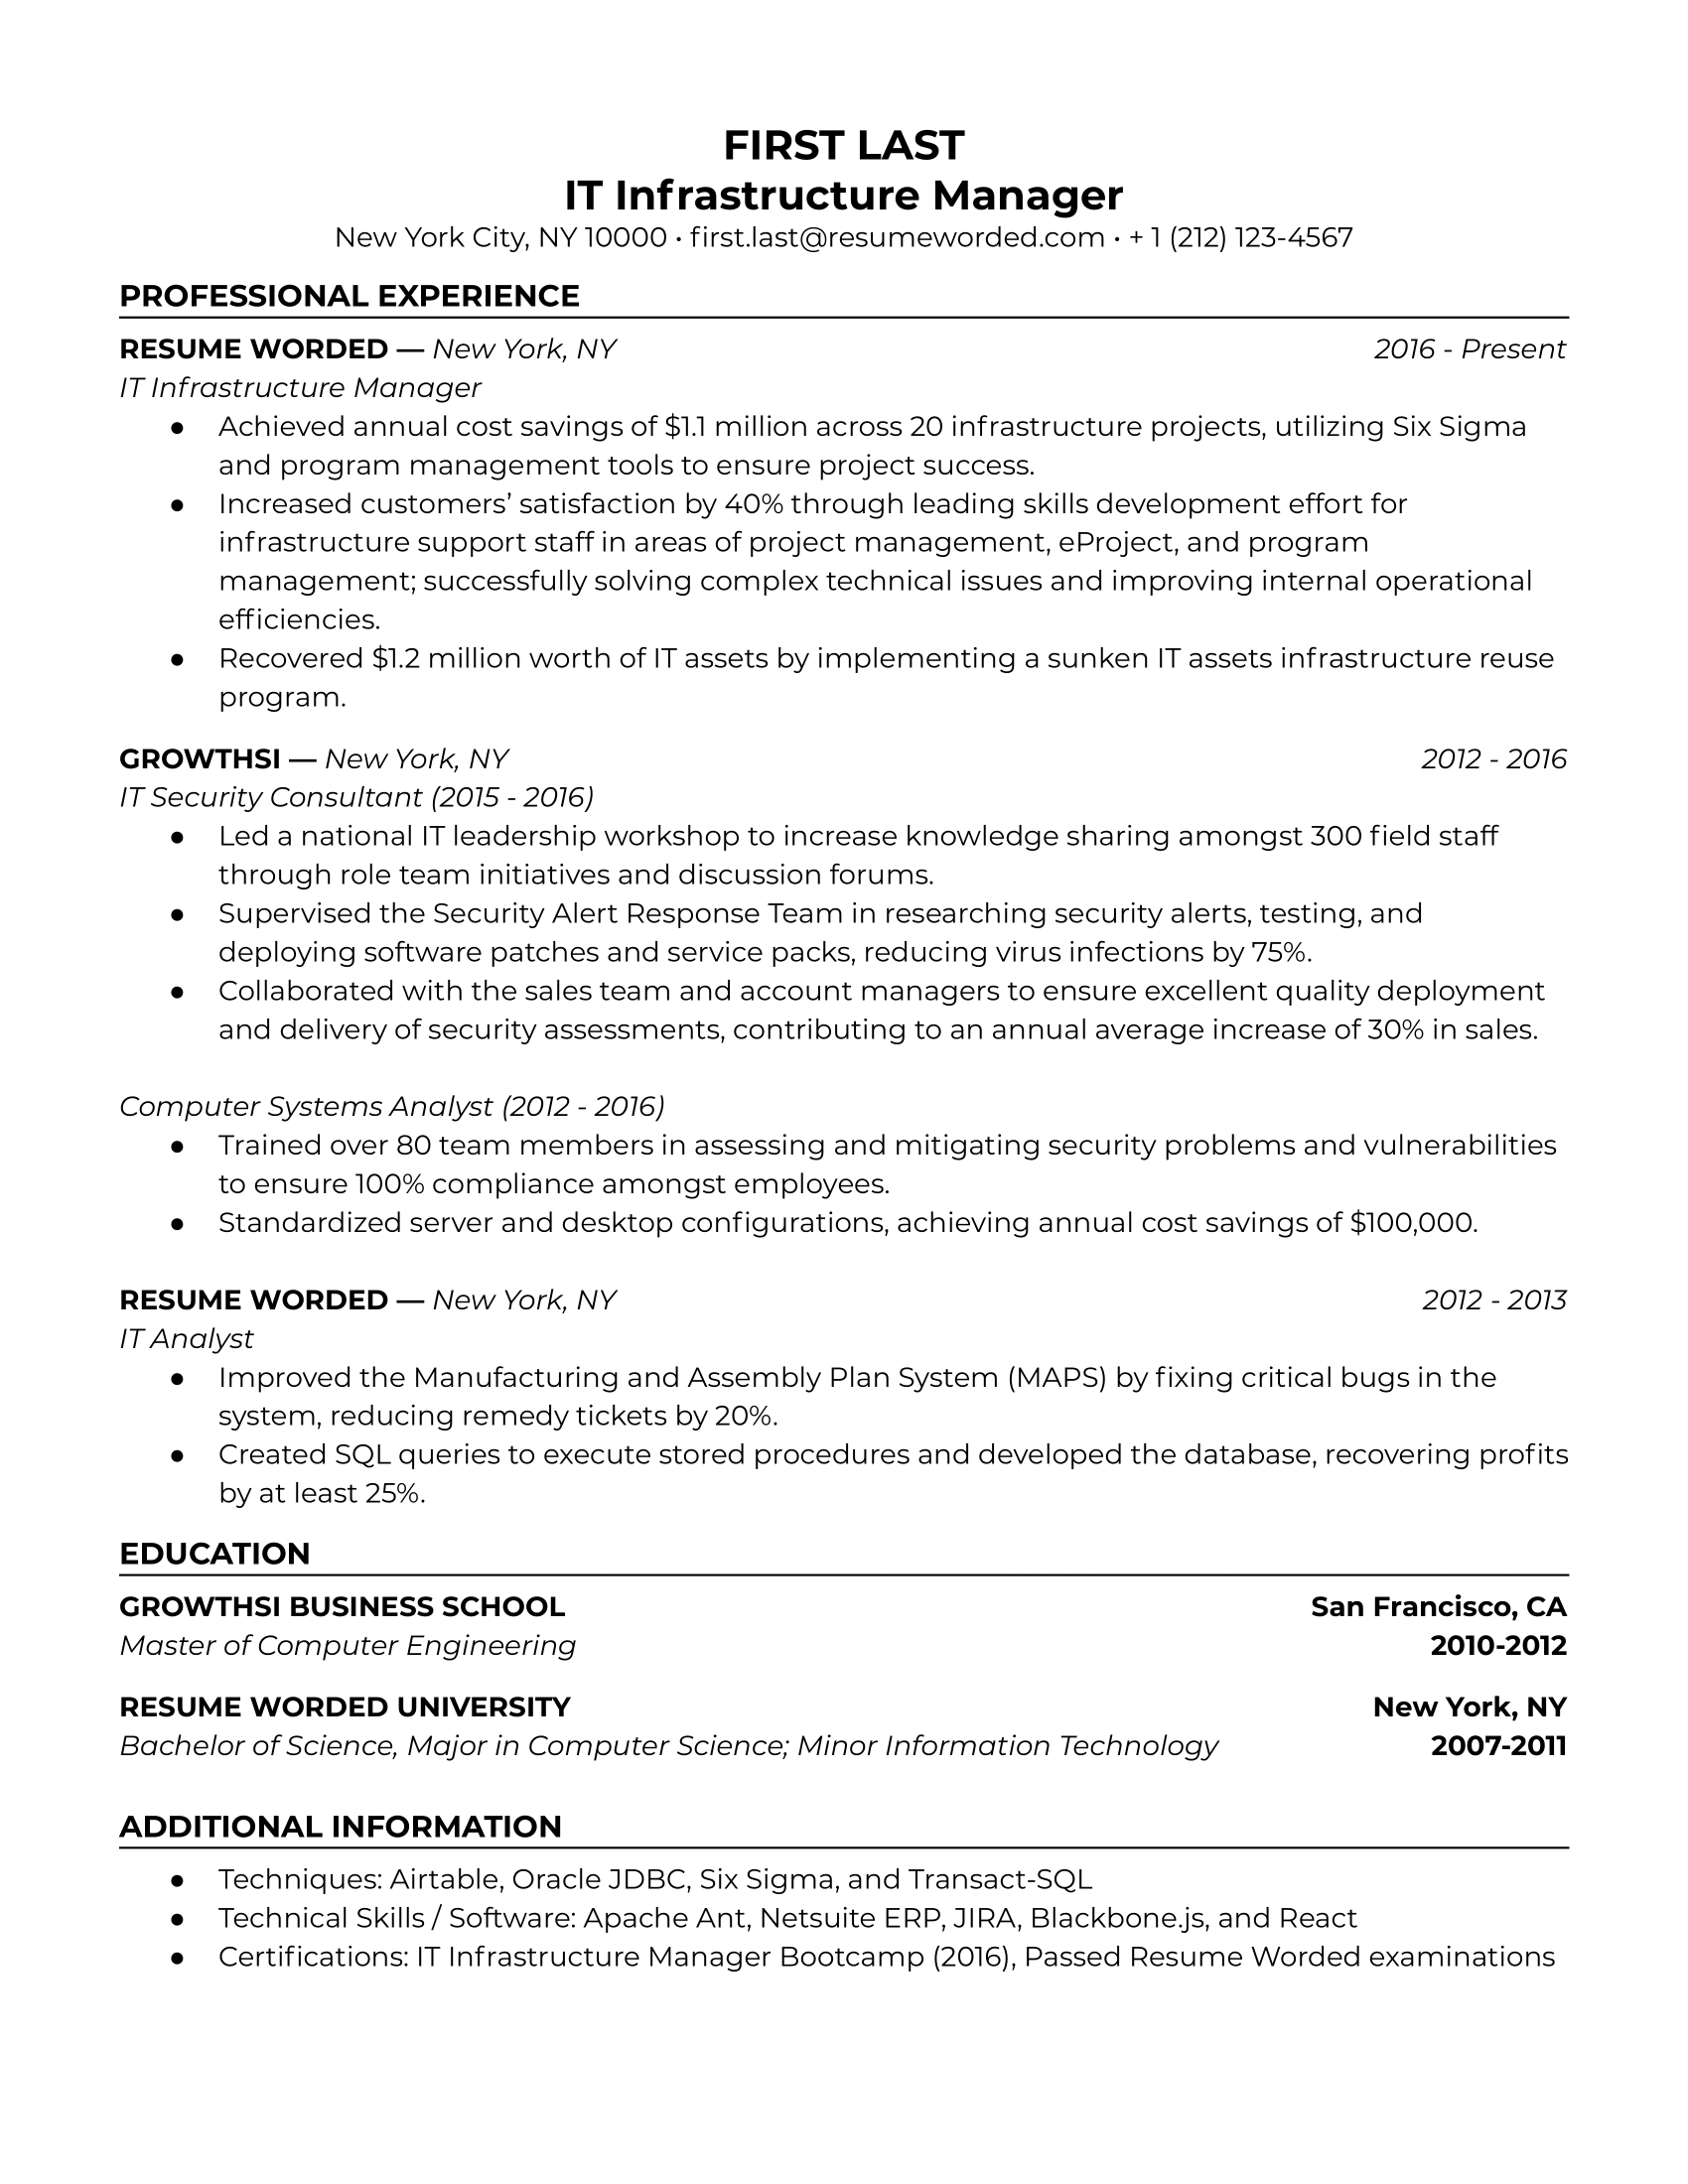 IT Infrastructure Manager resume example